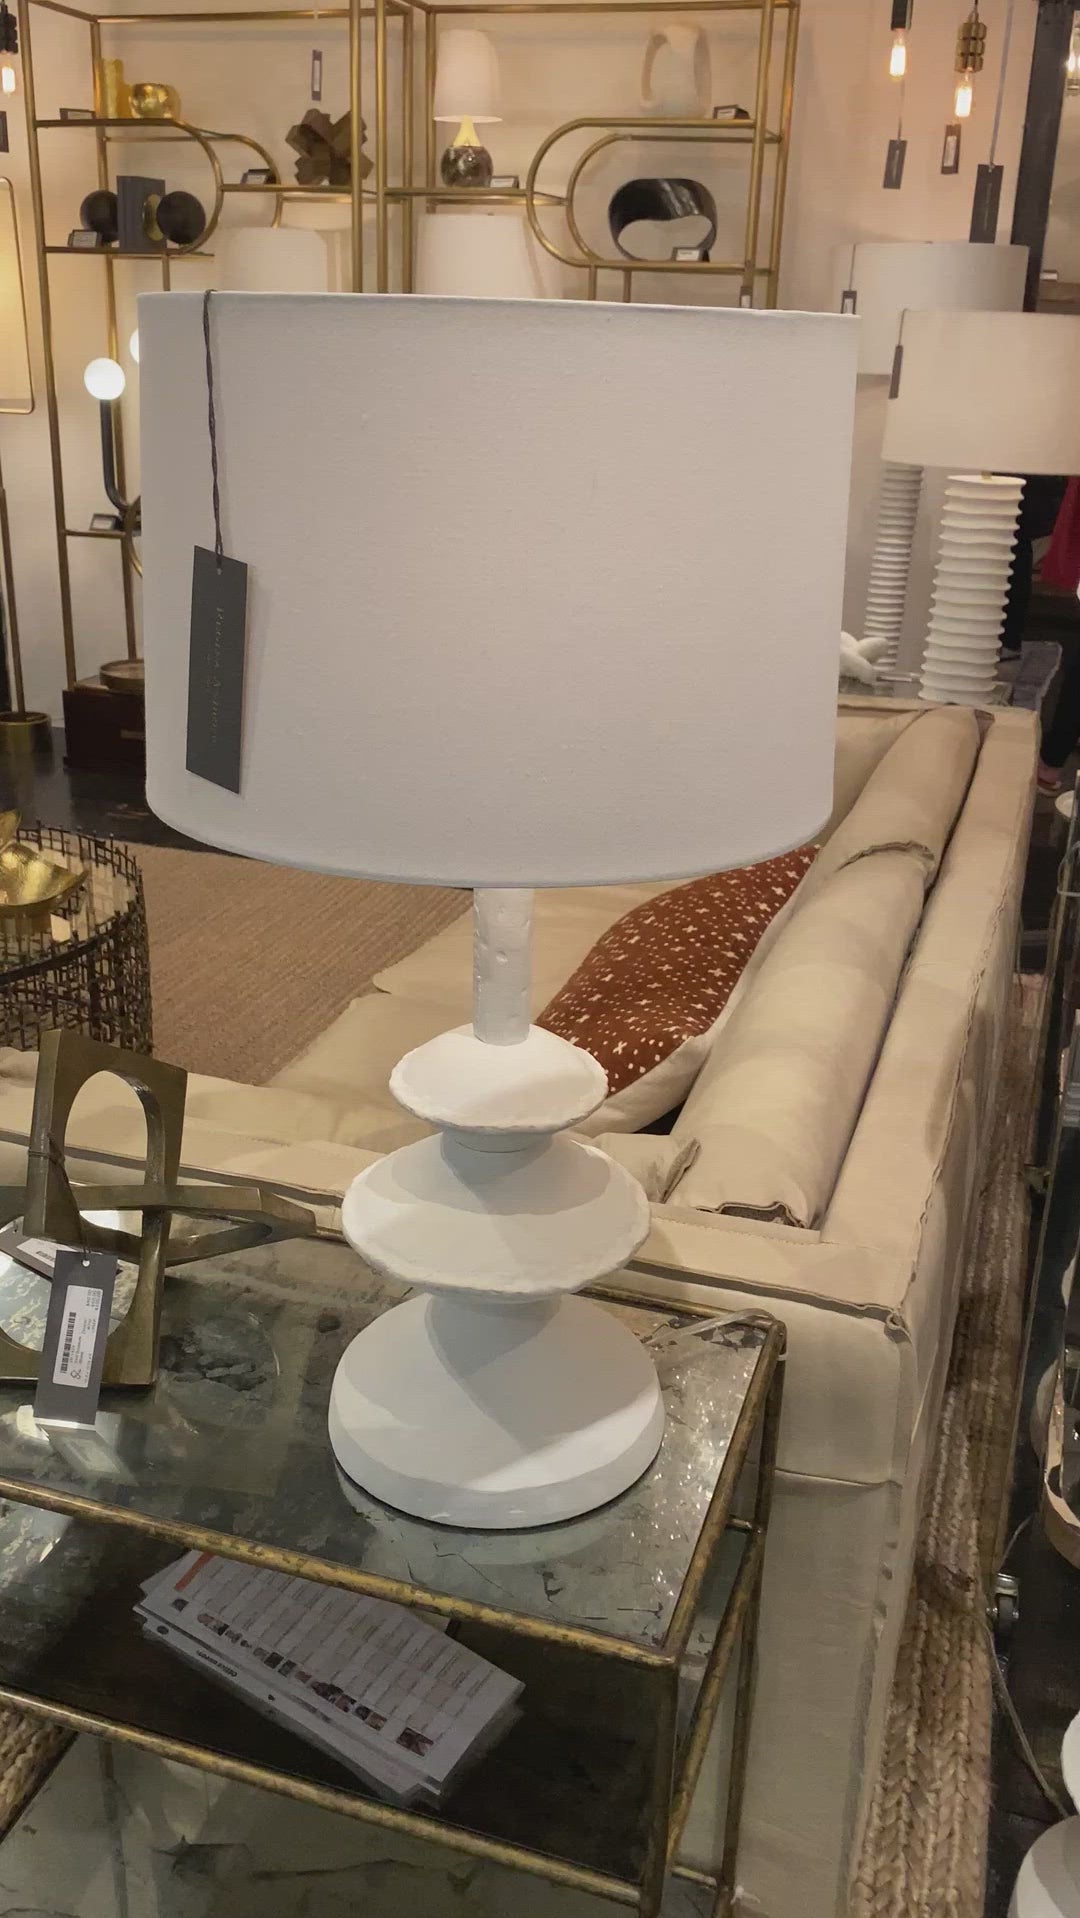 We love the unique base of this Hope Table Lamp. The matte white finish gives it clean look, completing the look for any living room, bedroom, or other space.   Size: 16"w x 16"d x 28"h  Shade Dims: 15 x 16 x 10.5